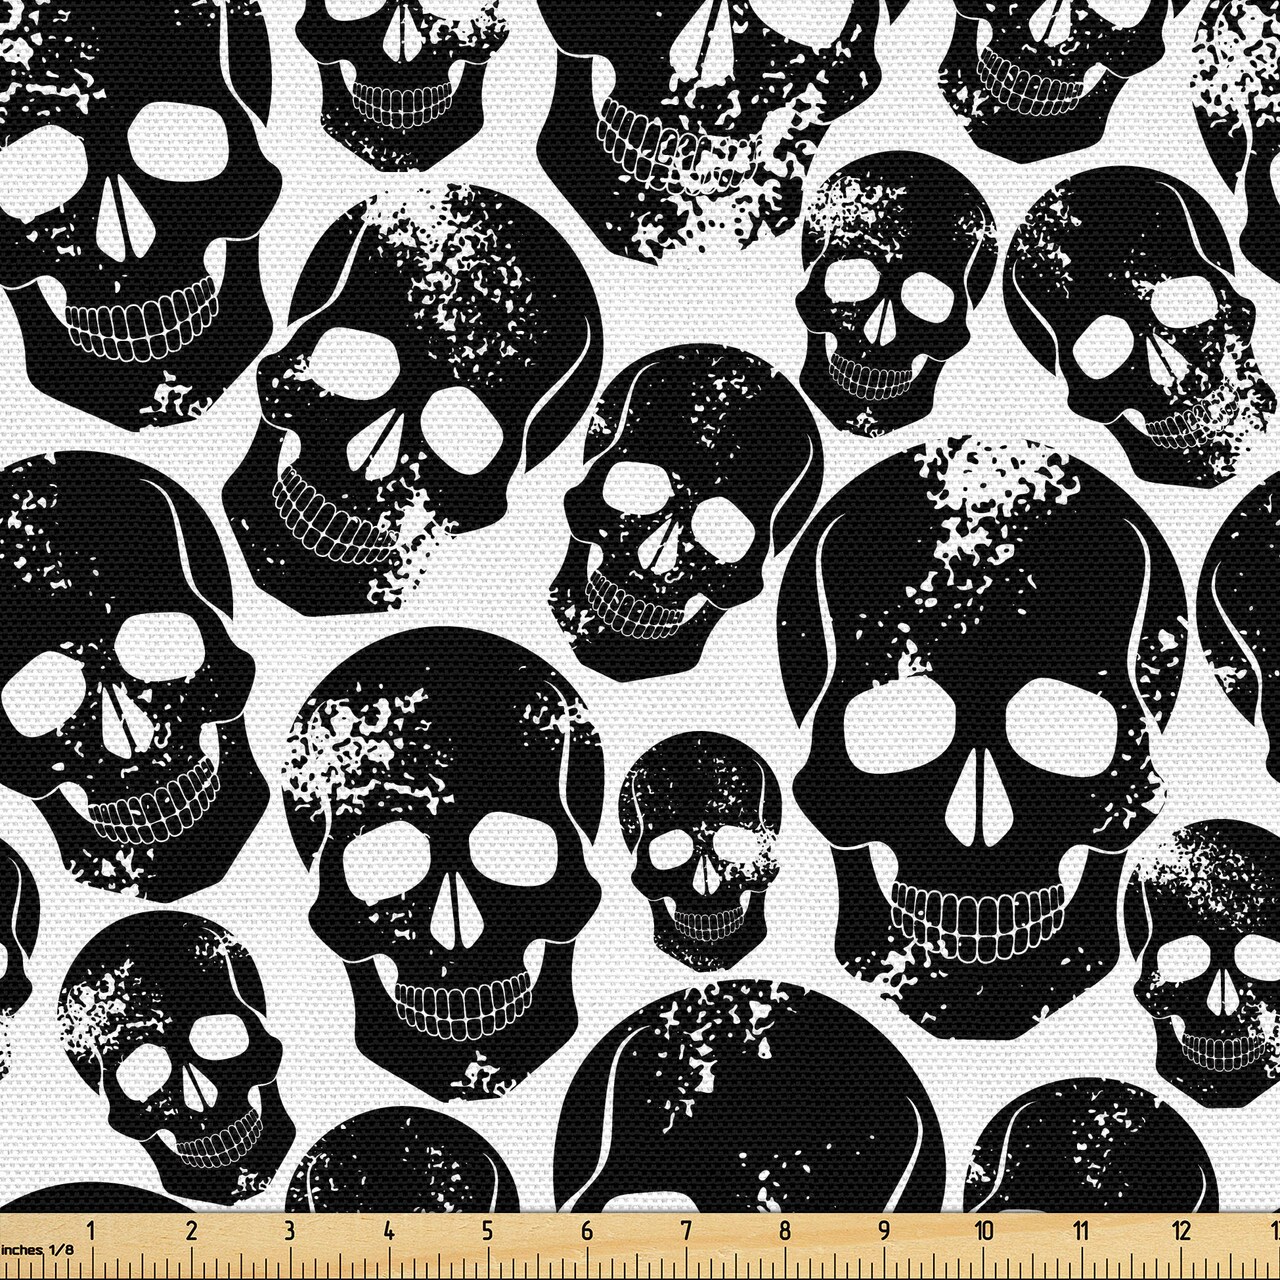 Ambesonne Gothic Fabric by The Yard, Grunge Black Human Skulls on White Backdrop Evil Men Fear Horror Death Skeleton, Decorative Fabric for Upholstery and Home Accents, 5 Yards, Charcoal Black